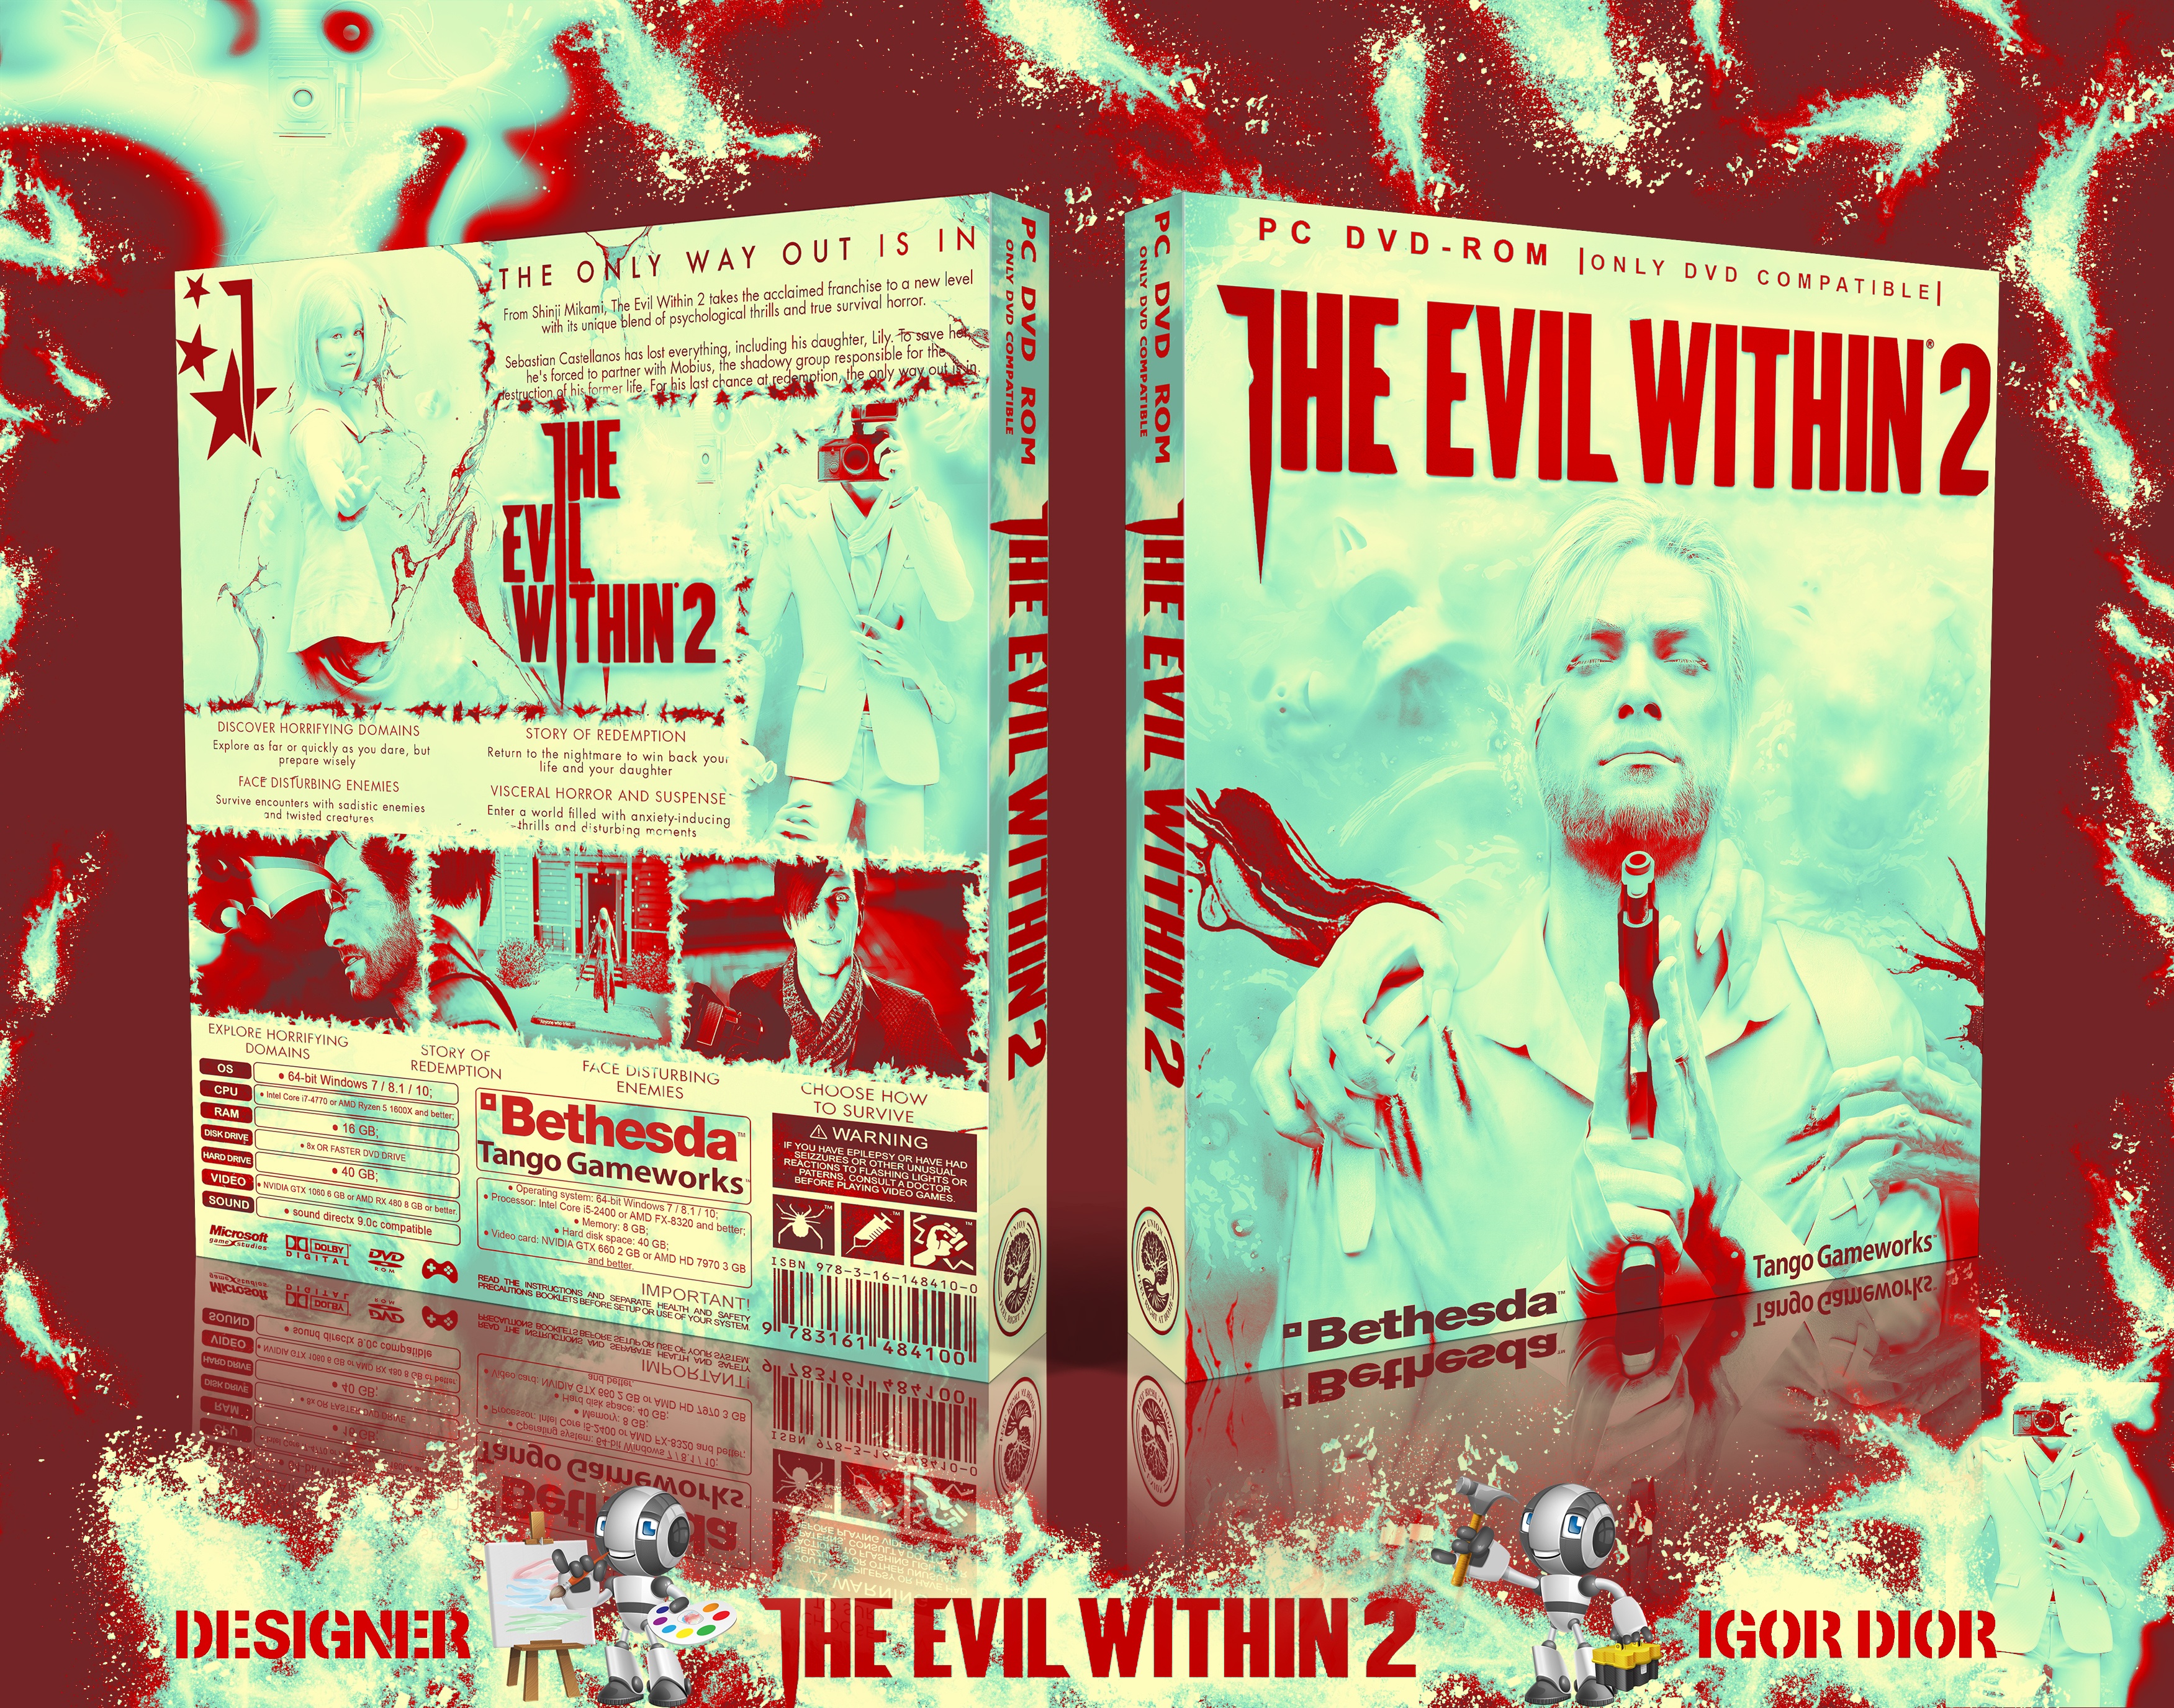 The Evil Within 2 box cover